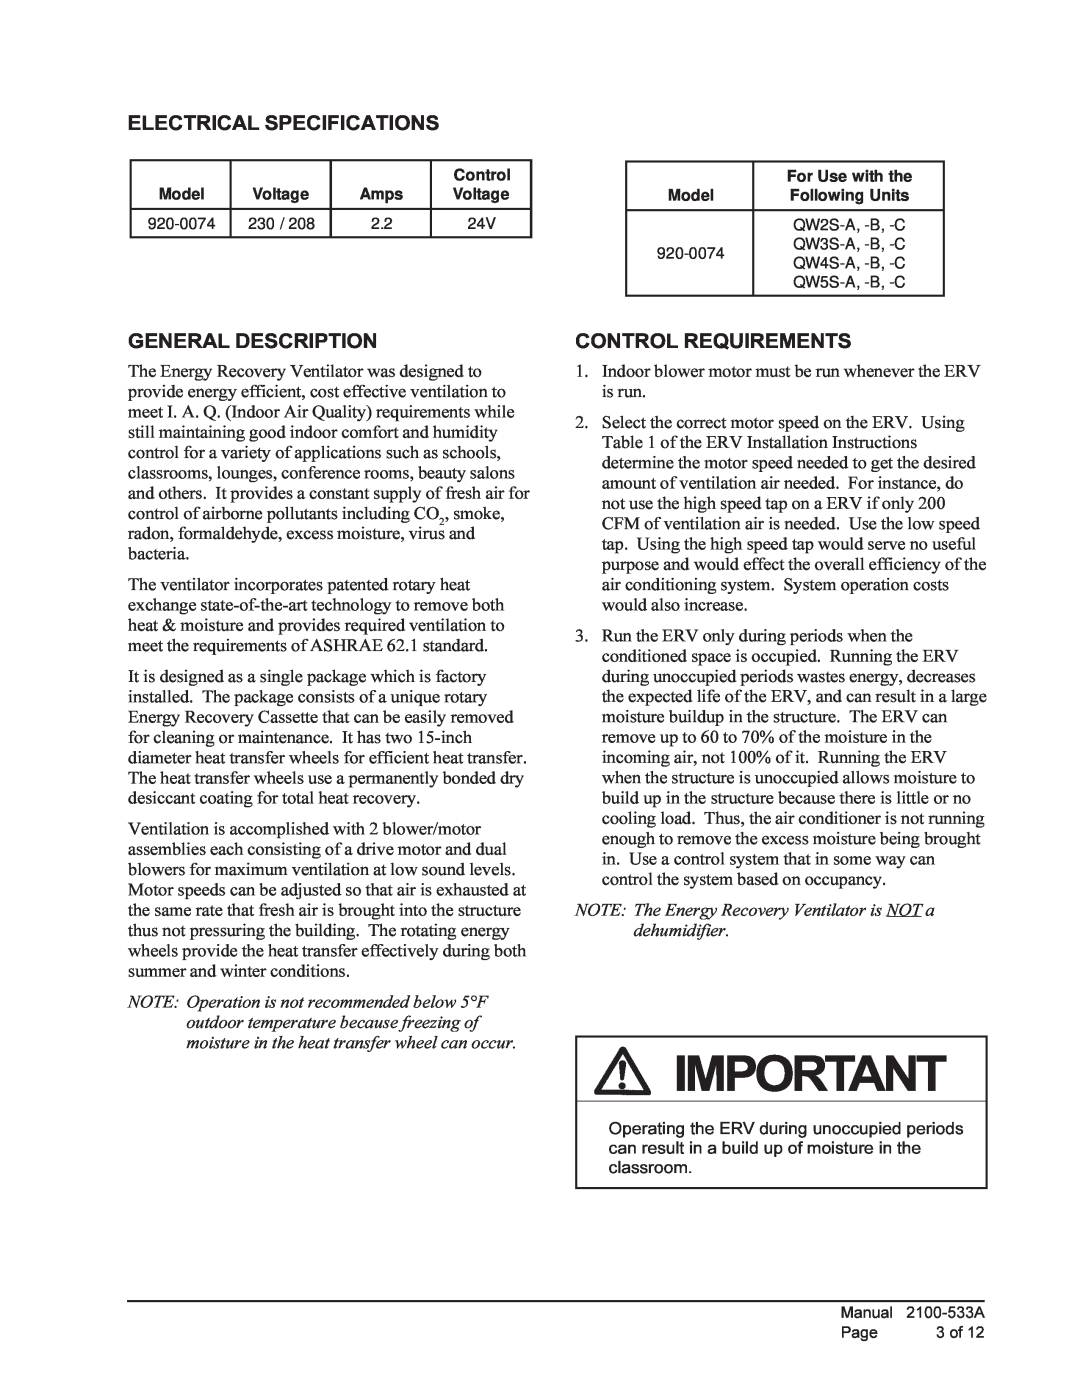 Bard 920-0074 qwserv manual Electrical Specifications, General Description, Control Requirements 